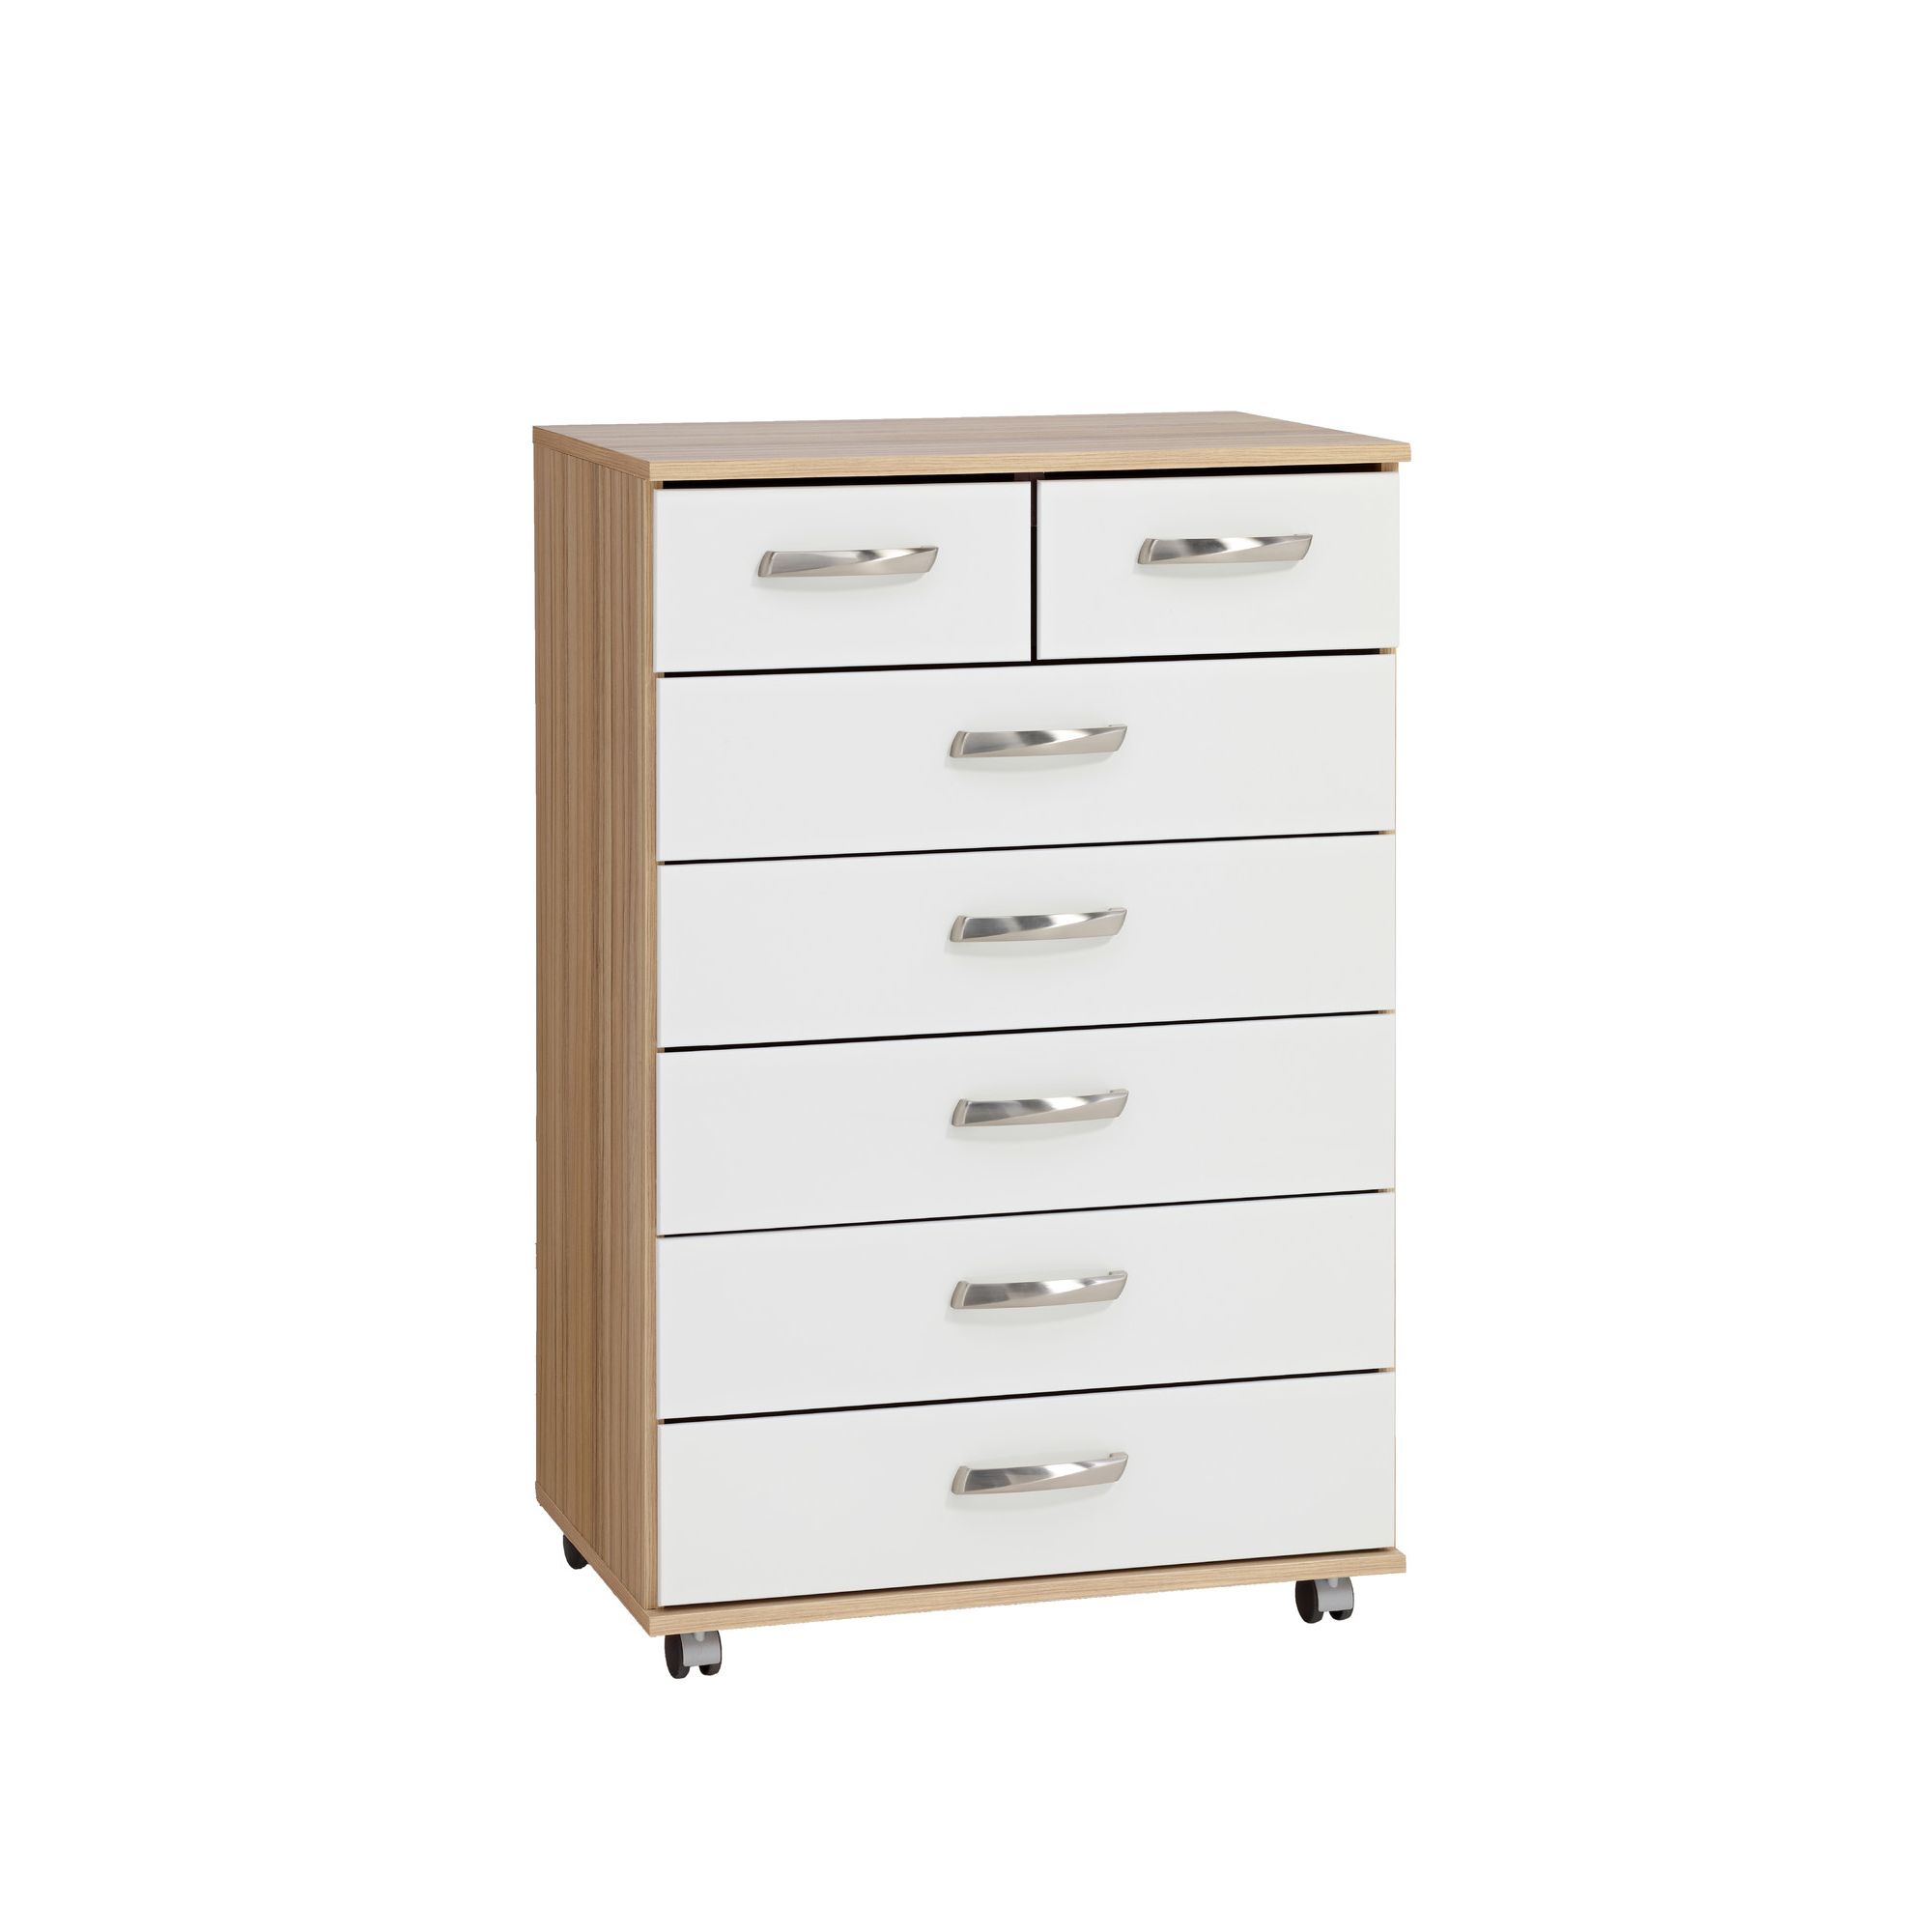 Ideal Furniture Regal 7 Drawer Chest in white at Tesco Direct